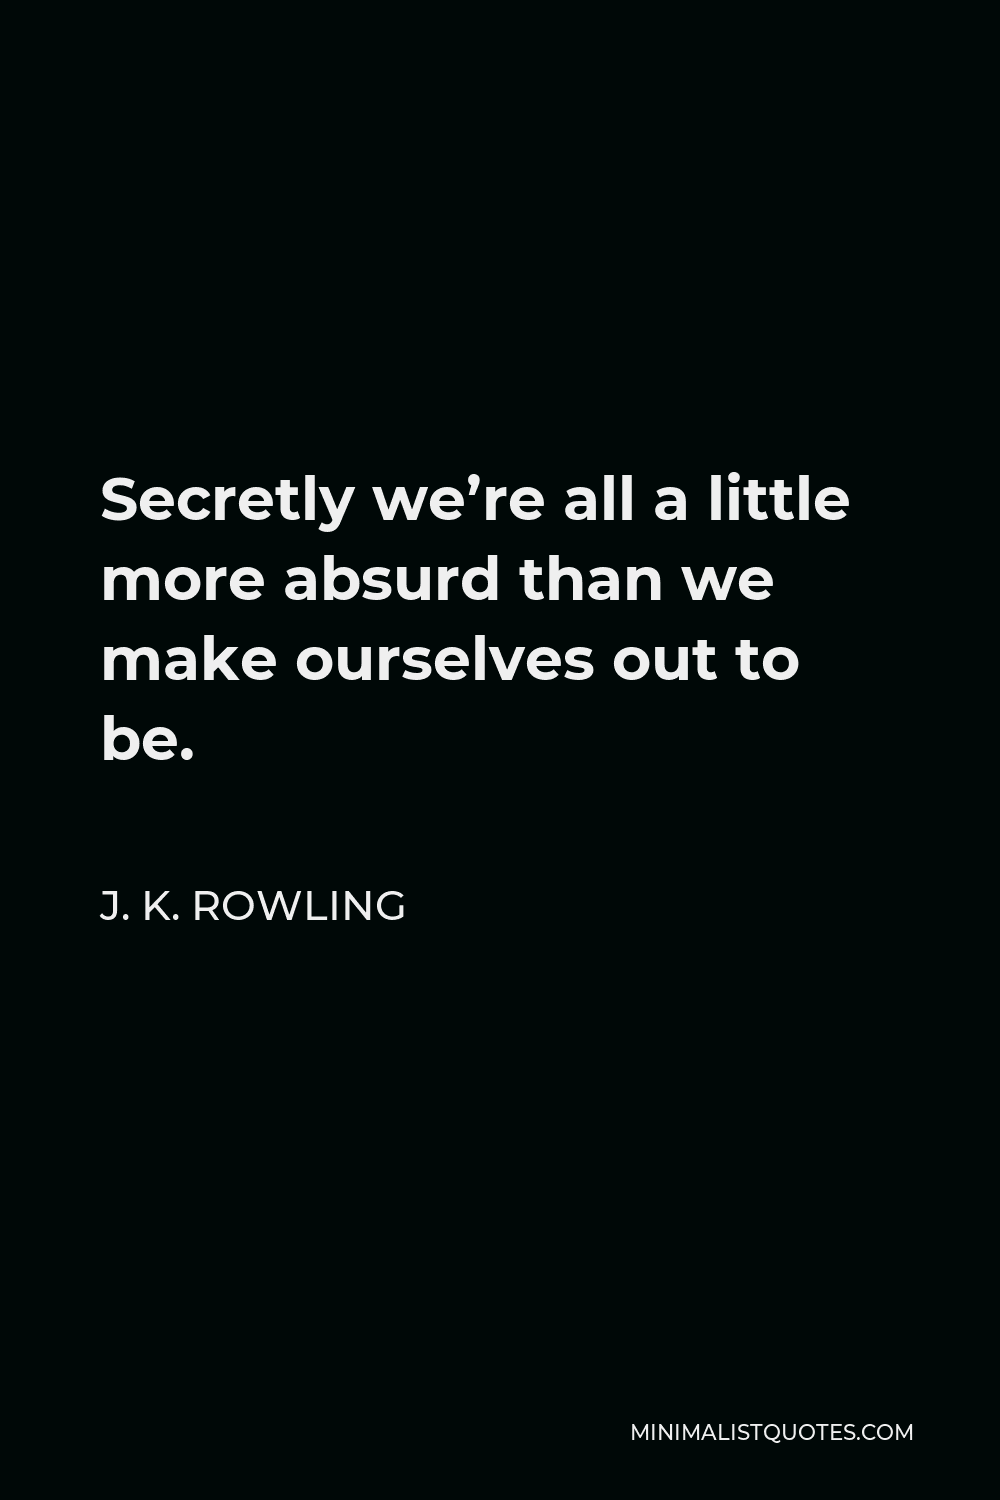 J. K. Rowling Quote - Secretly we’re all a little more absurd than we make ourselves out to be.